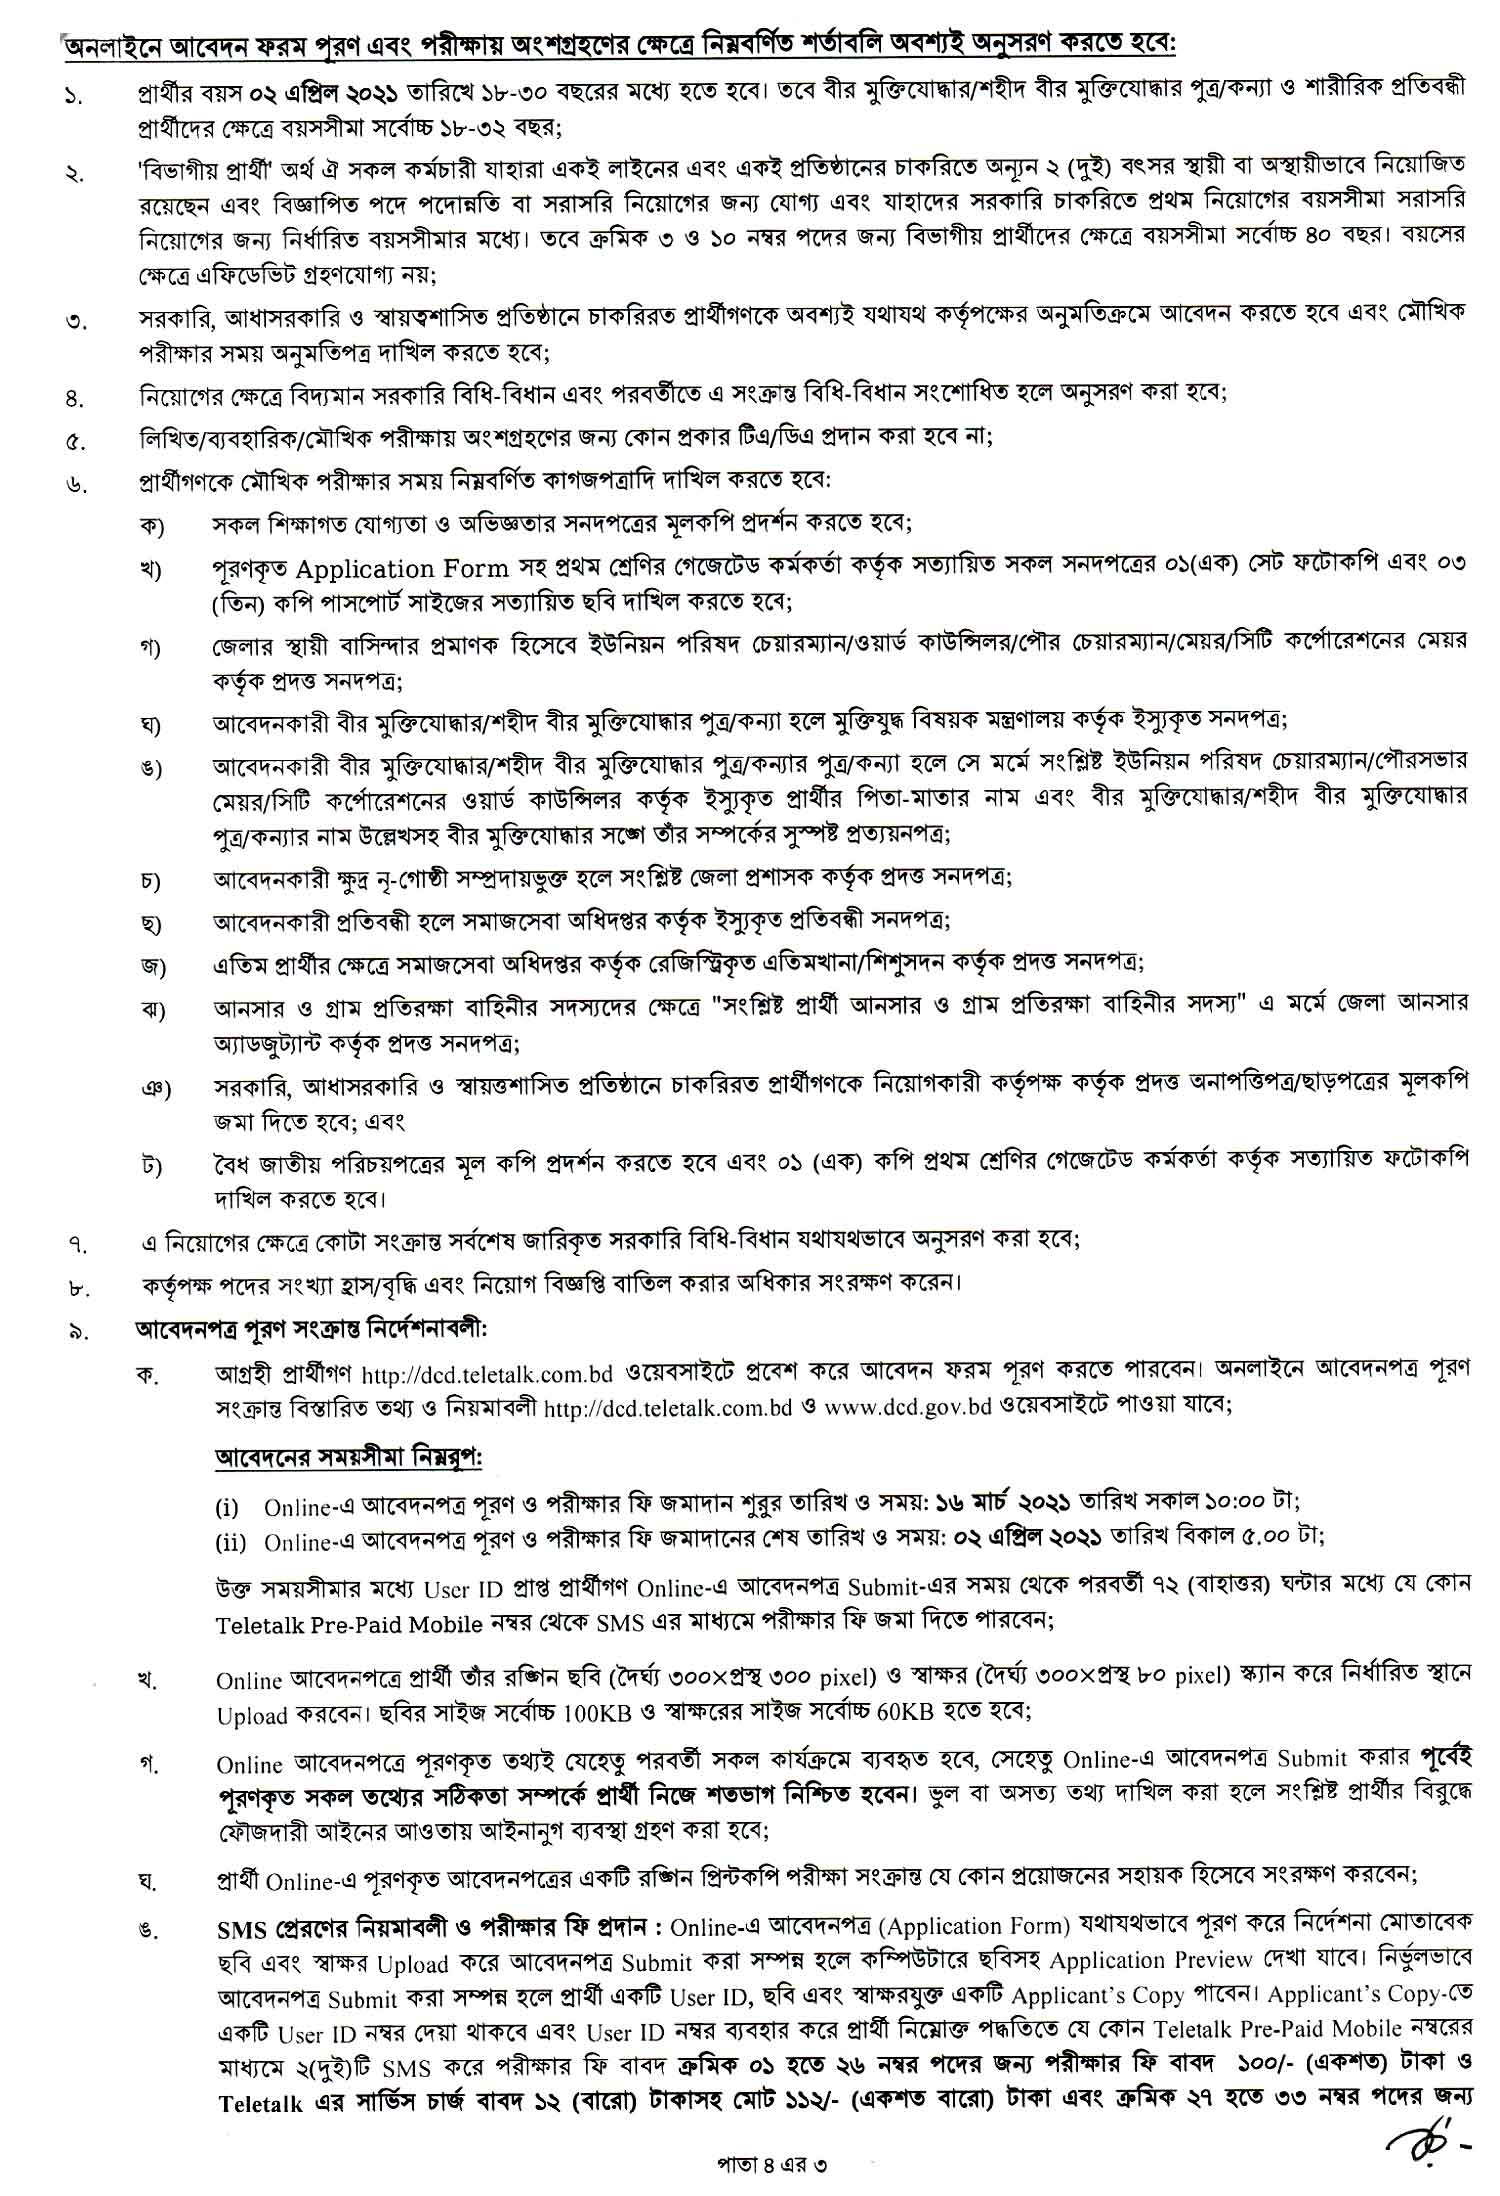 Office of the Chief Administrative Officer Job Circular